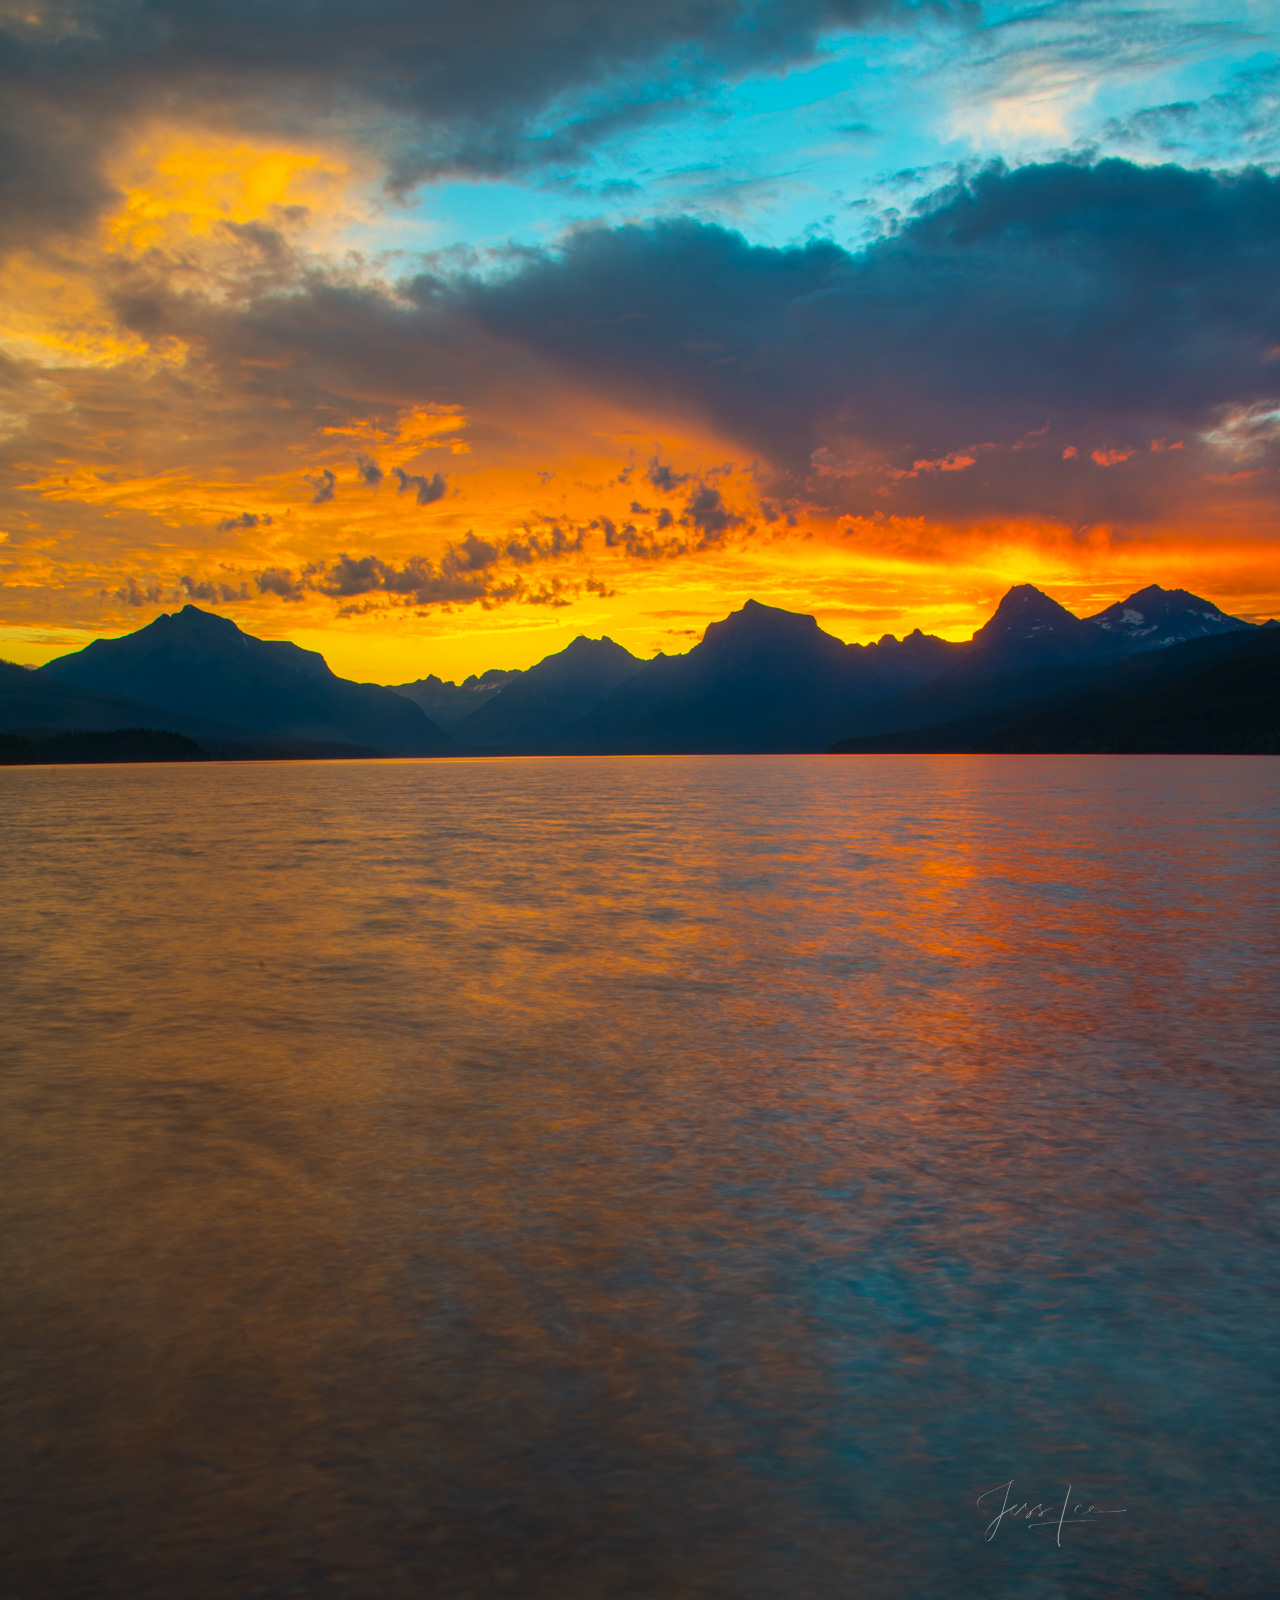 Last Glow a picture of Glacier National Park. A fine Art Limited Edition Print of sunset at Glacier. Order yours today and enjoy...